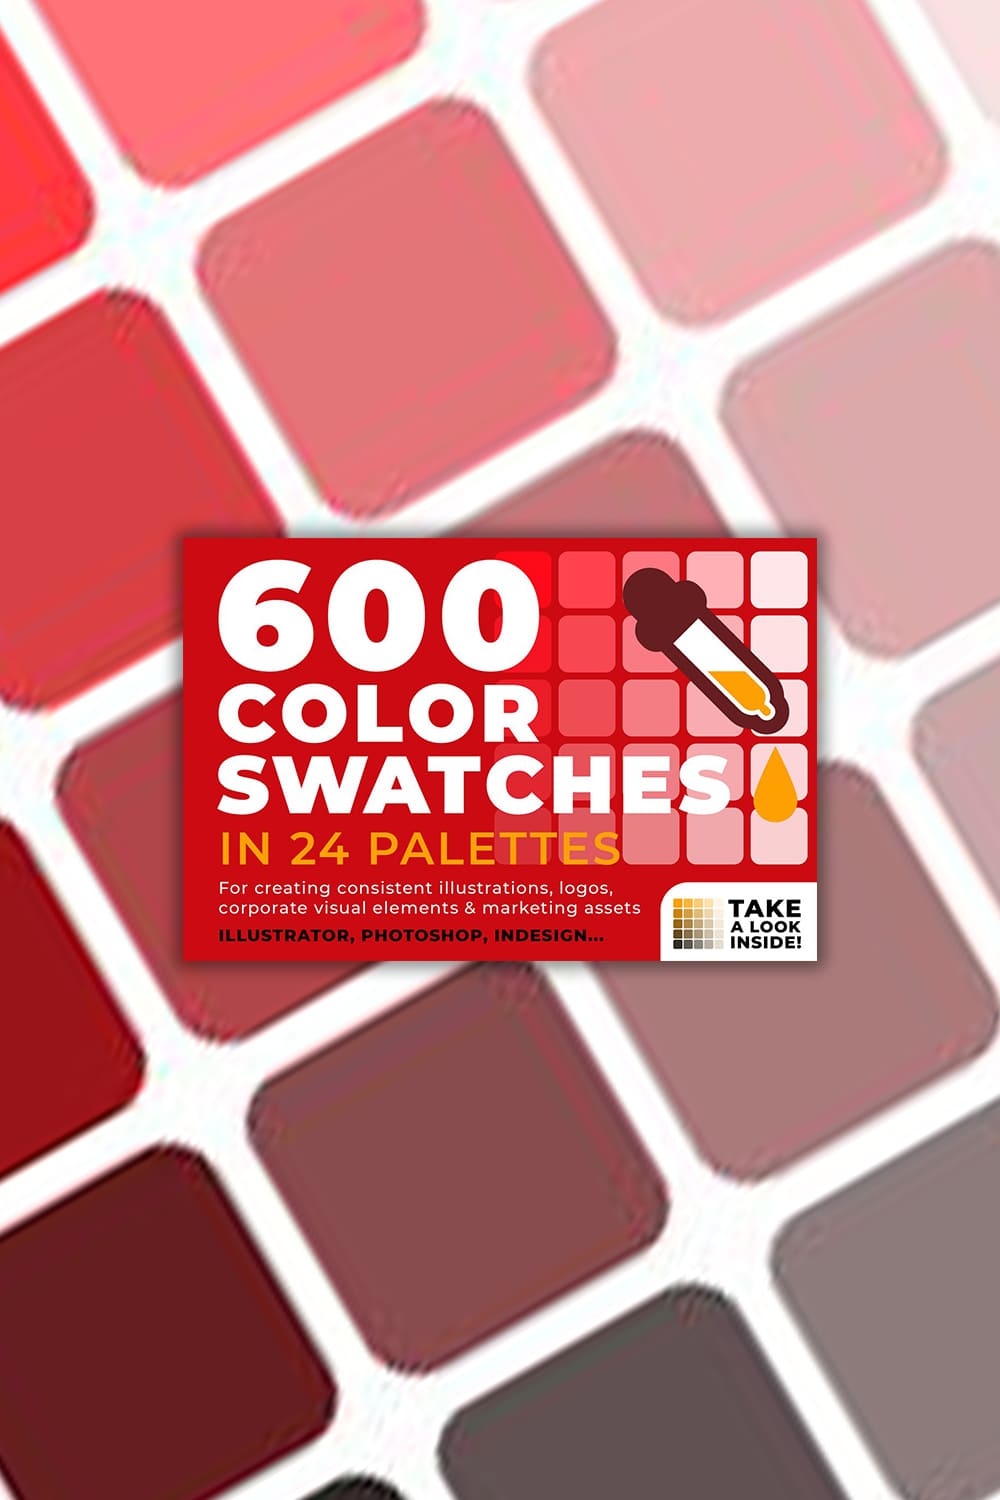 600 Color Swatches In 24 Palettes - "Take A Look Inside!".